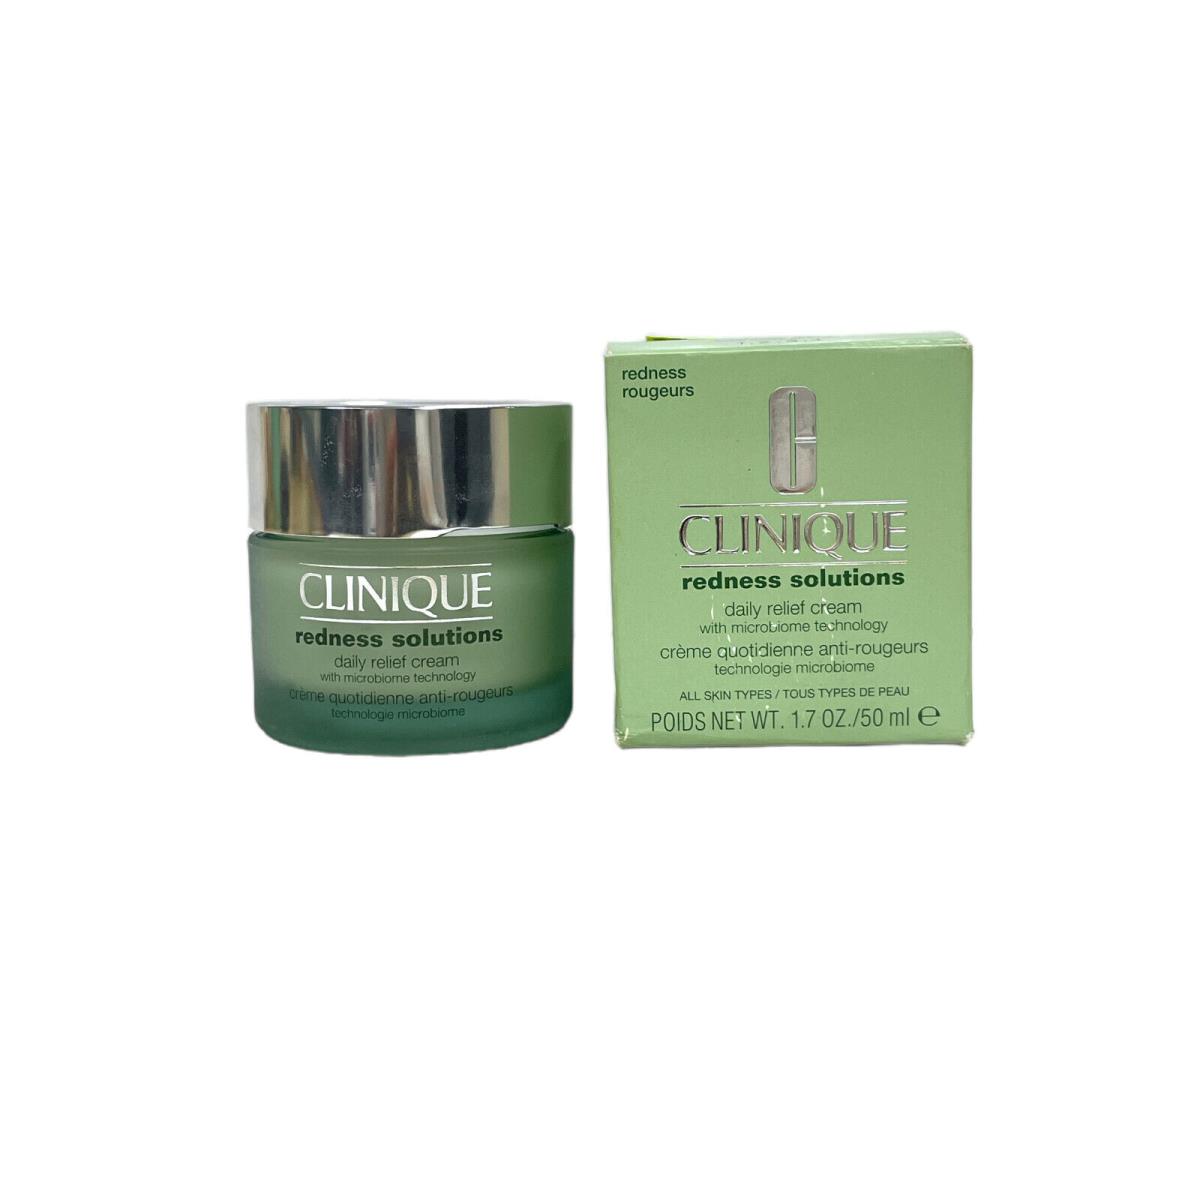 Clinique Redness Solutions Daily Relief Cream 1.7oz/50ml As Seen In Picture